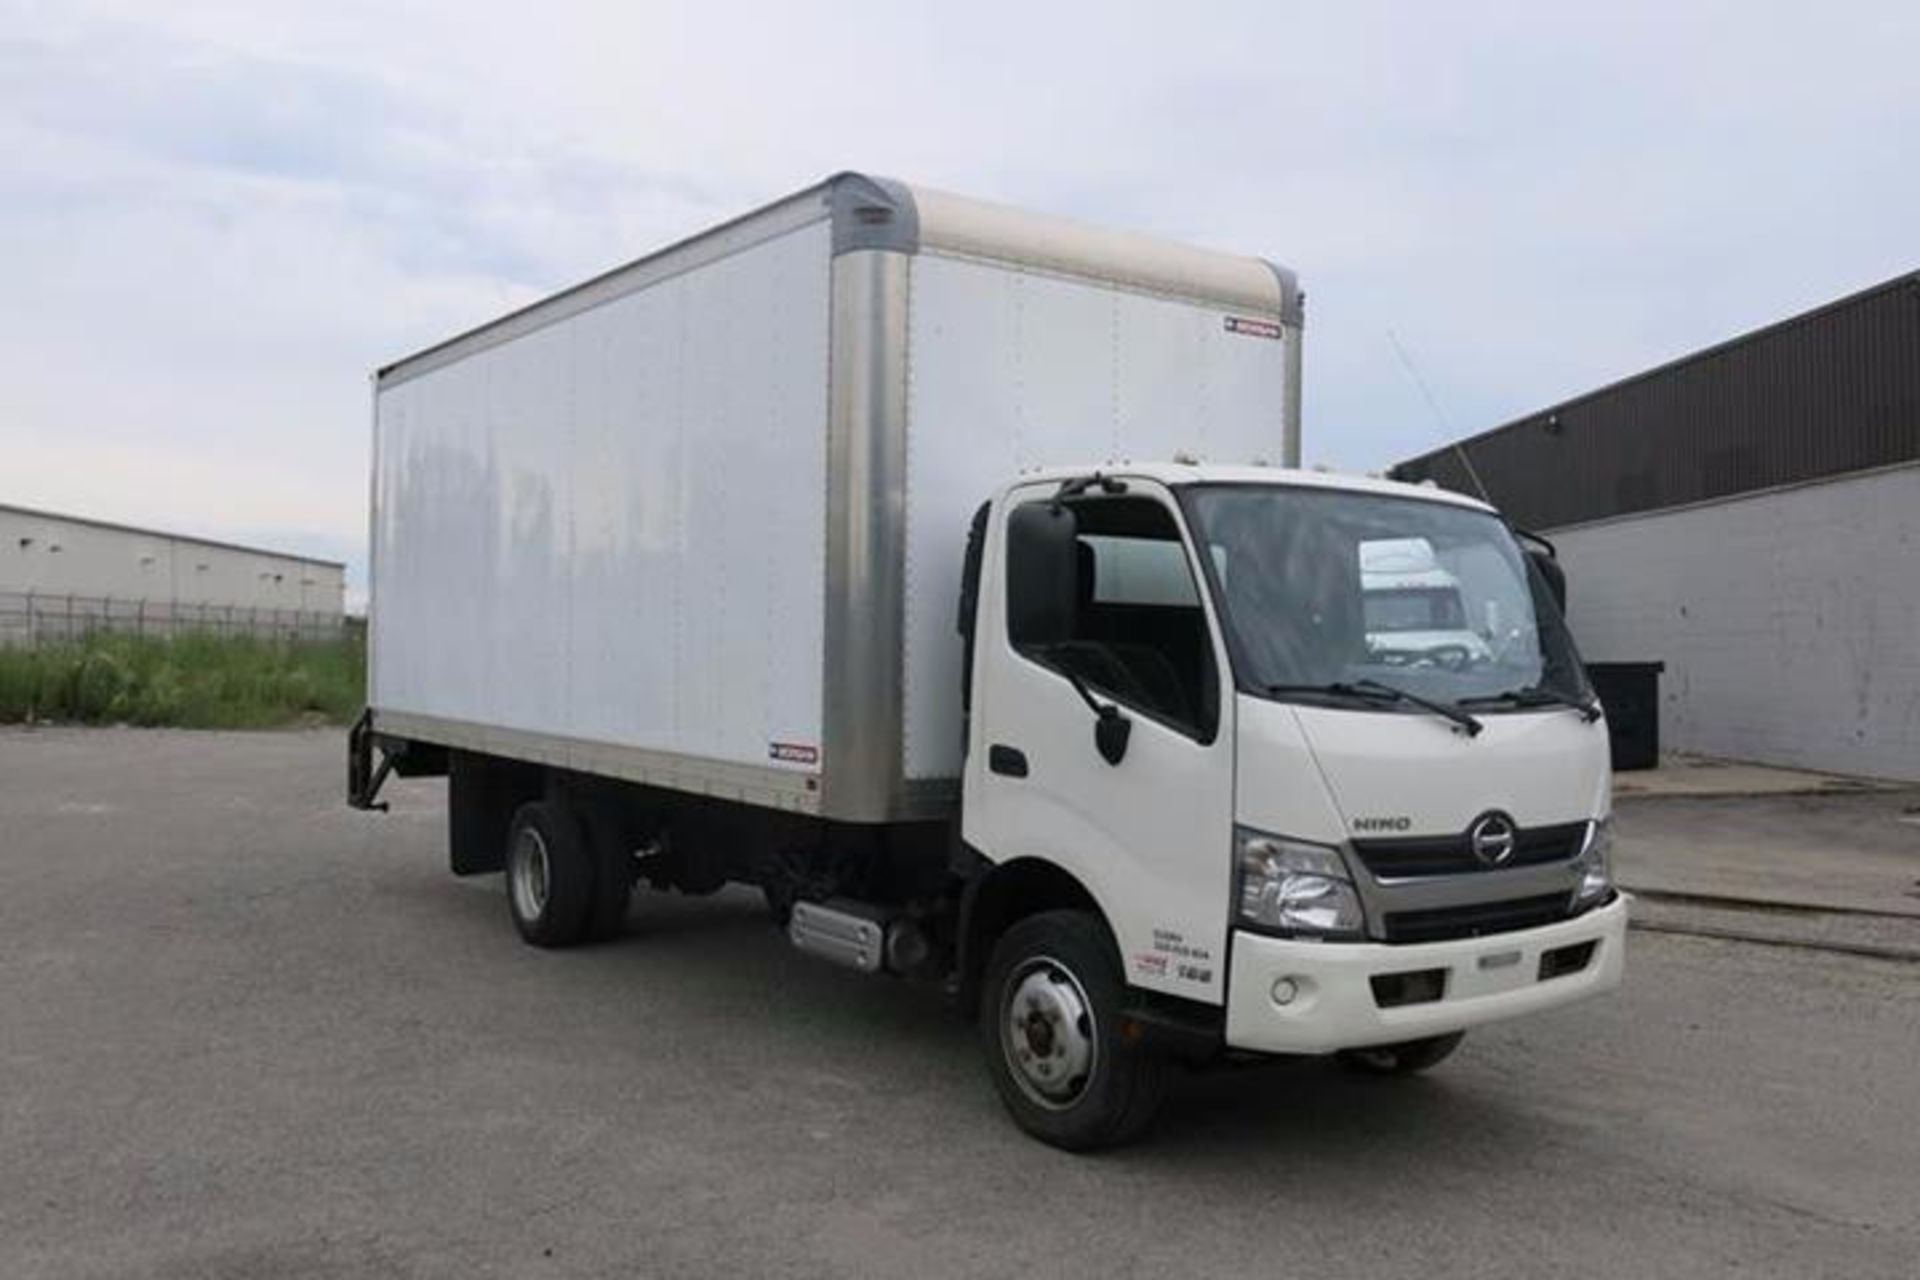 HINO 195, 20’, BOX TRUCK WITH POWER TAILGATE, BOX DIMENSIONS (20’ LONG X 7’8” WIDE, 7’8” HIGH) - Image 3 of 9